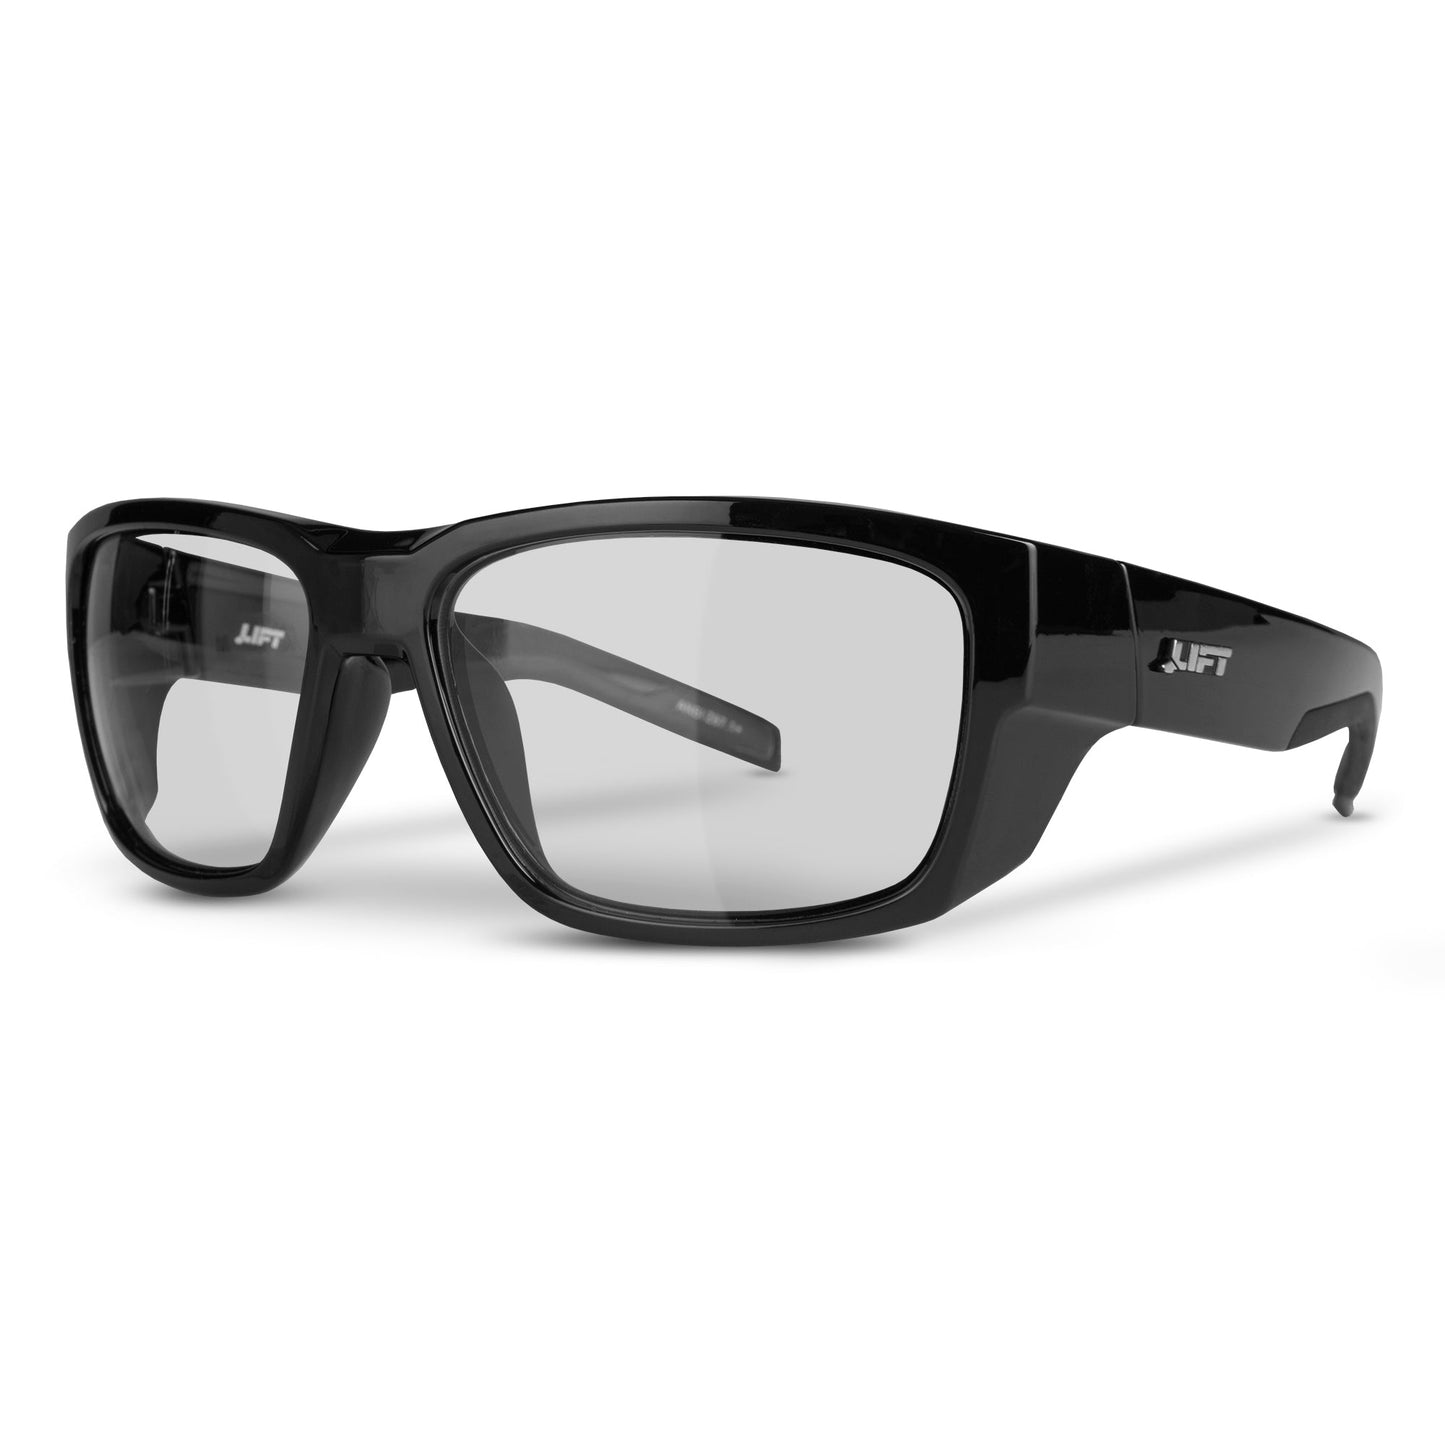 Fusion Safety Glasses - LIFT Safety